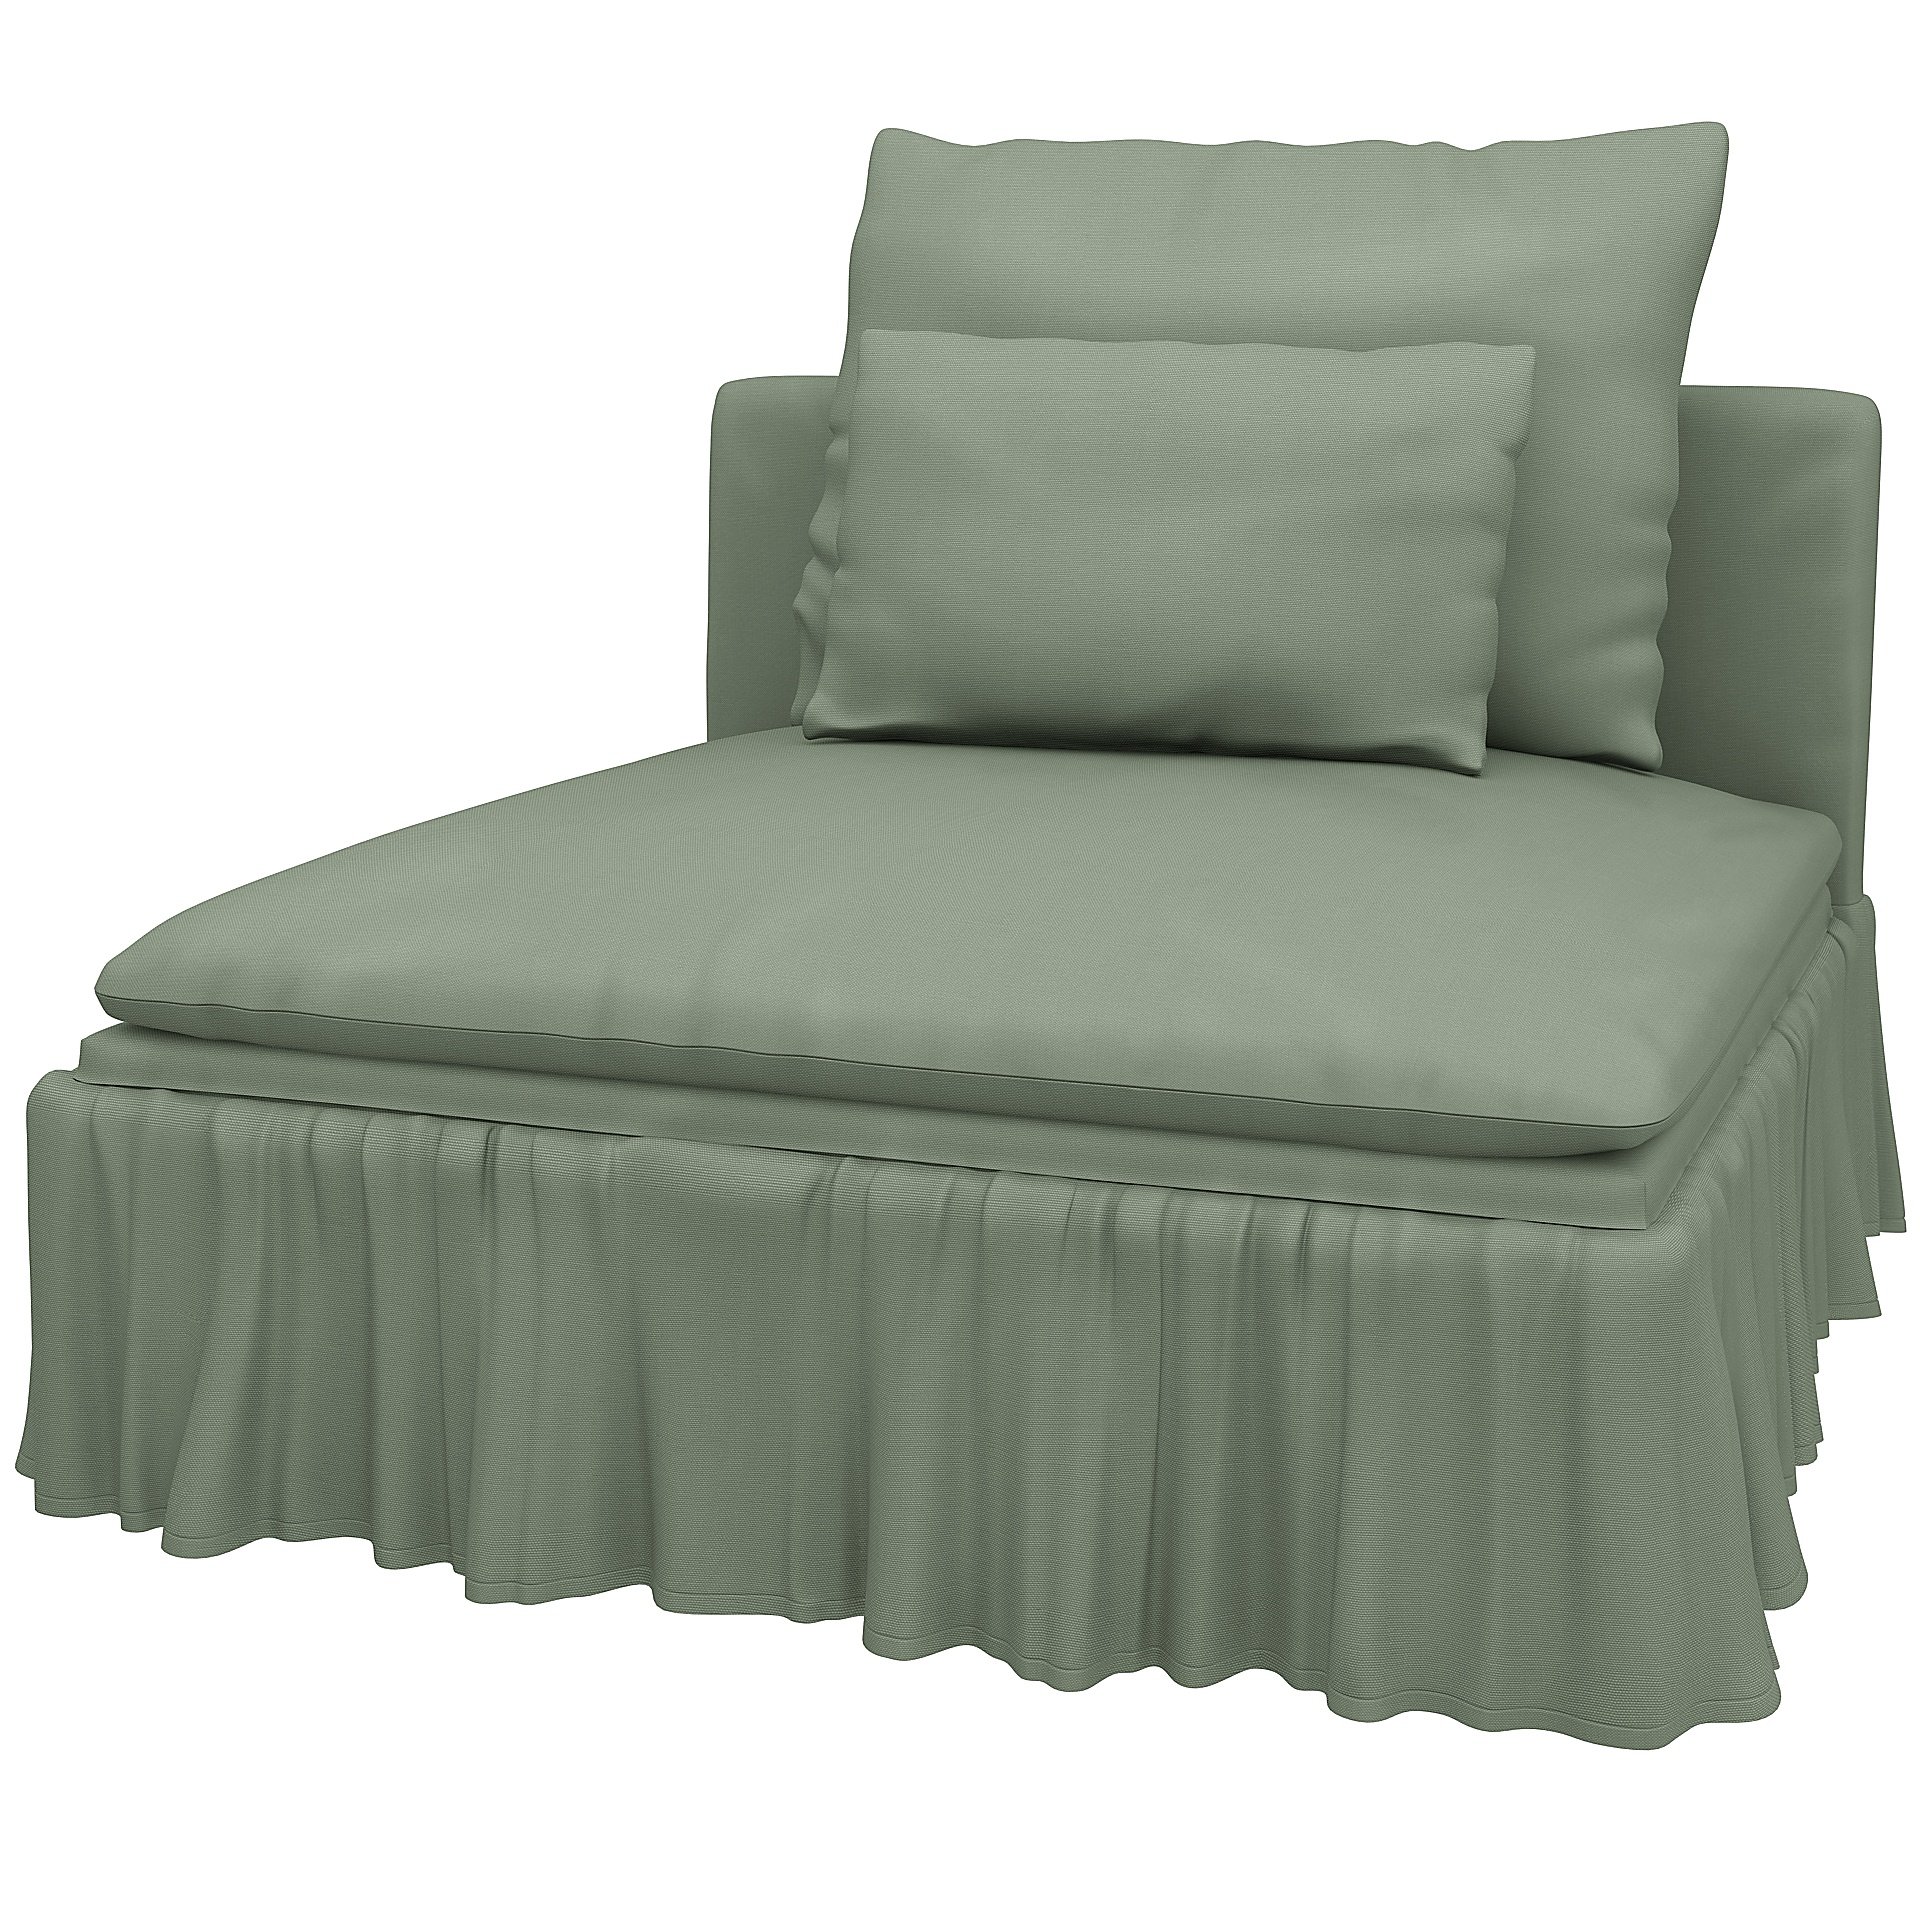 IKEA - Soderhamn 1 seat section cover Maximalist Fit, Seagrass, Cotton - Bemz